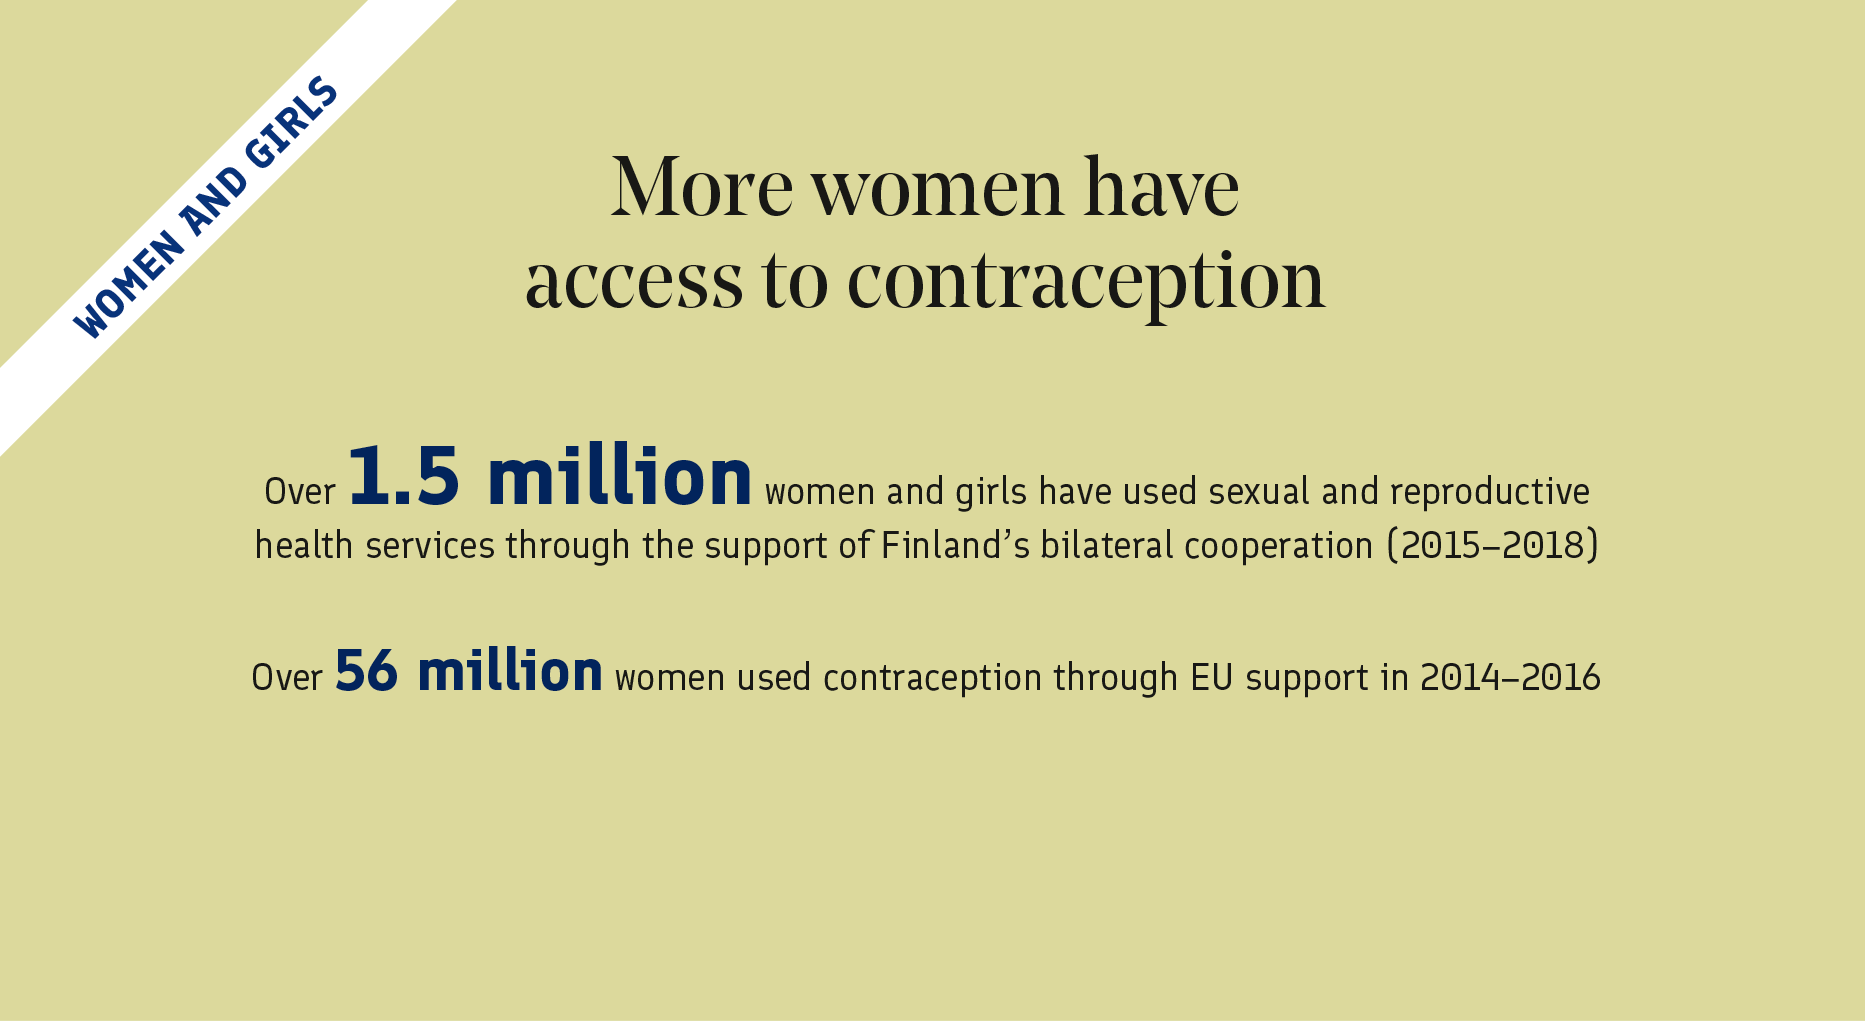 A greater number of women have access to contraception. In 2015–2017, more than 1.5 million women and girls used sexual and reproductive health services made available to them through bilateral development cooperation between Finland and its partner countries. More than 56 million women used contraception with EU support between 2014 and 2016.